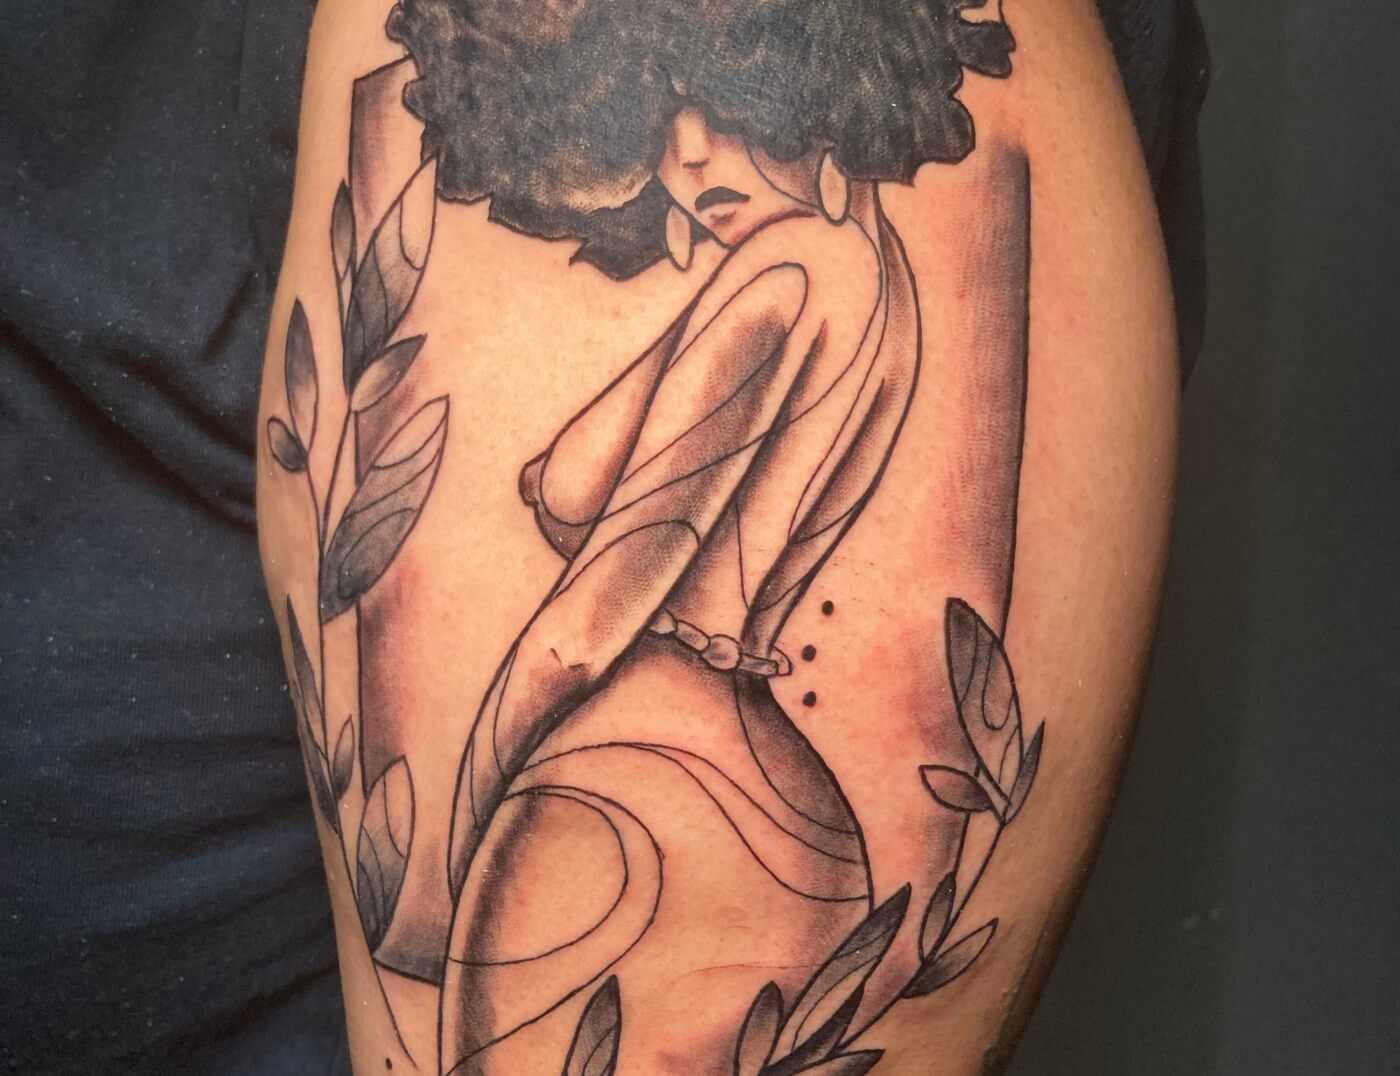 Funky Afro-American Woman In Black & Grey By Funk Tha World. We're open late night until 2AM. Call 404-973-7828 or stop by for a free consultation with Funk.